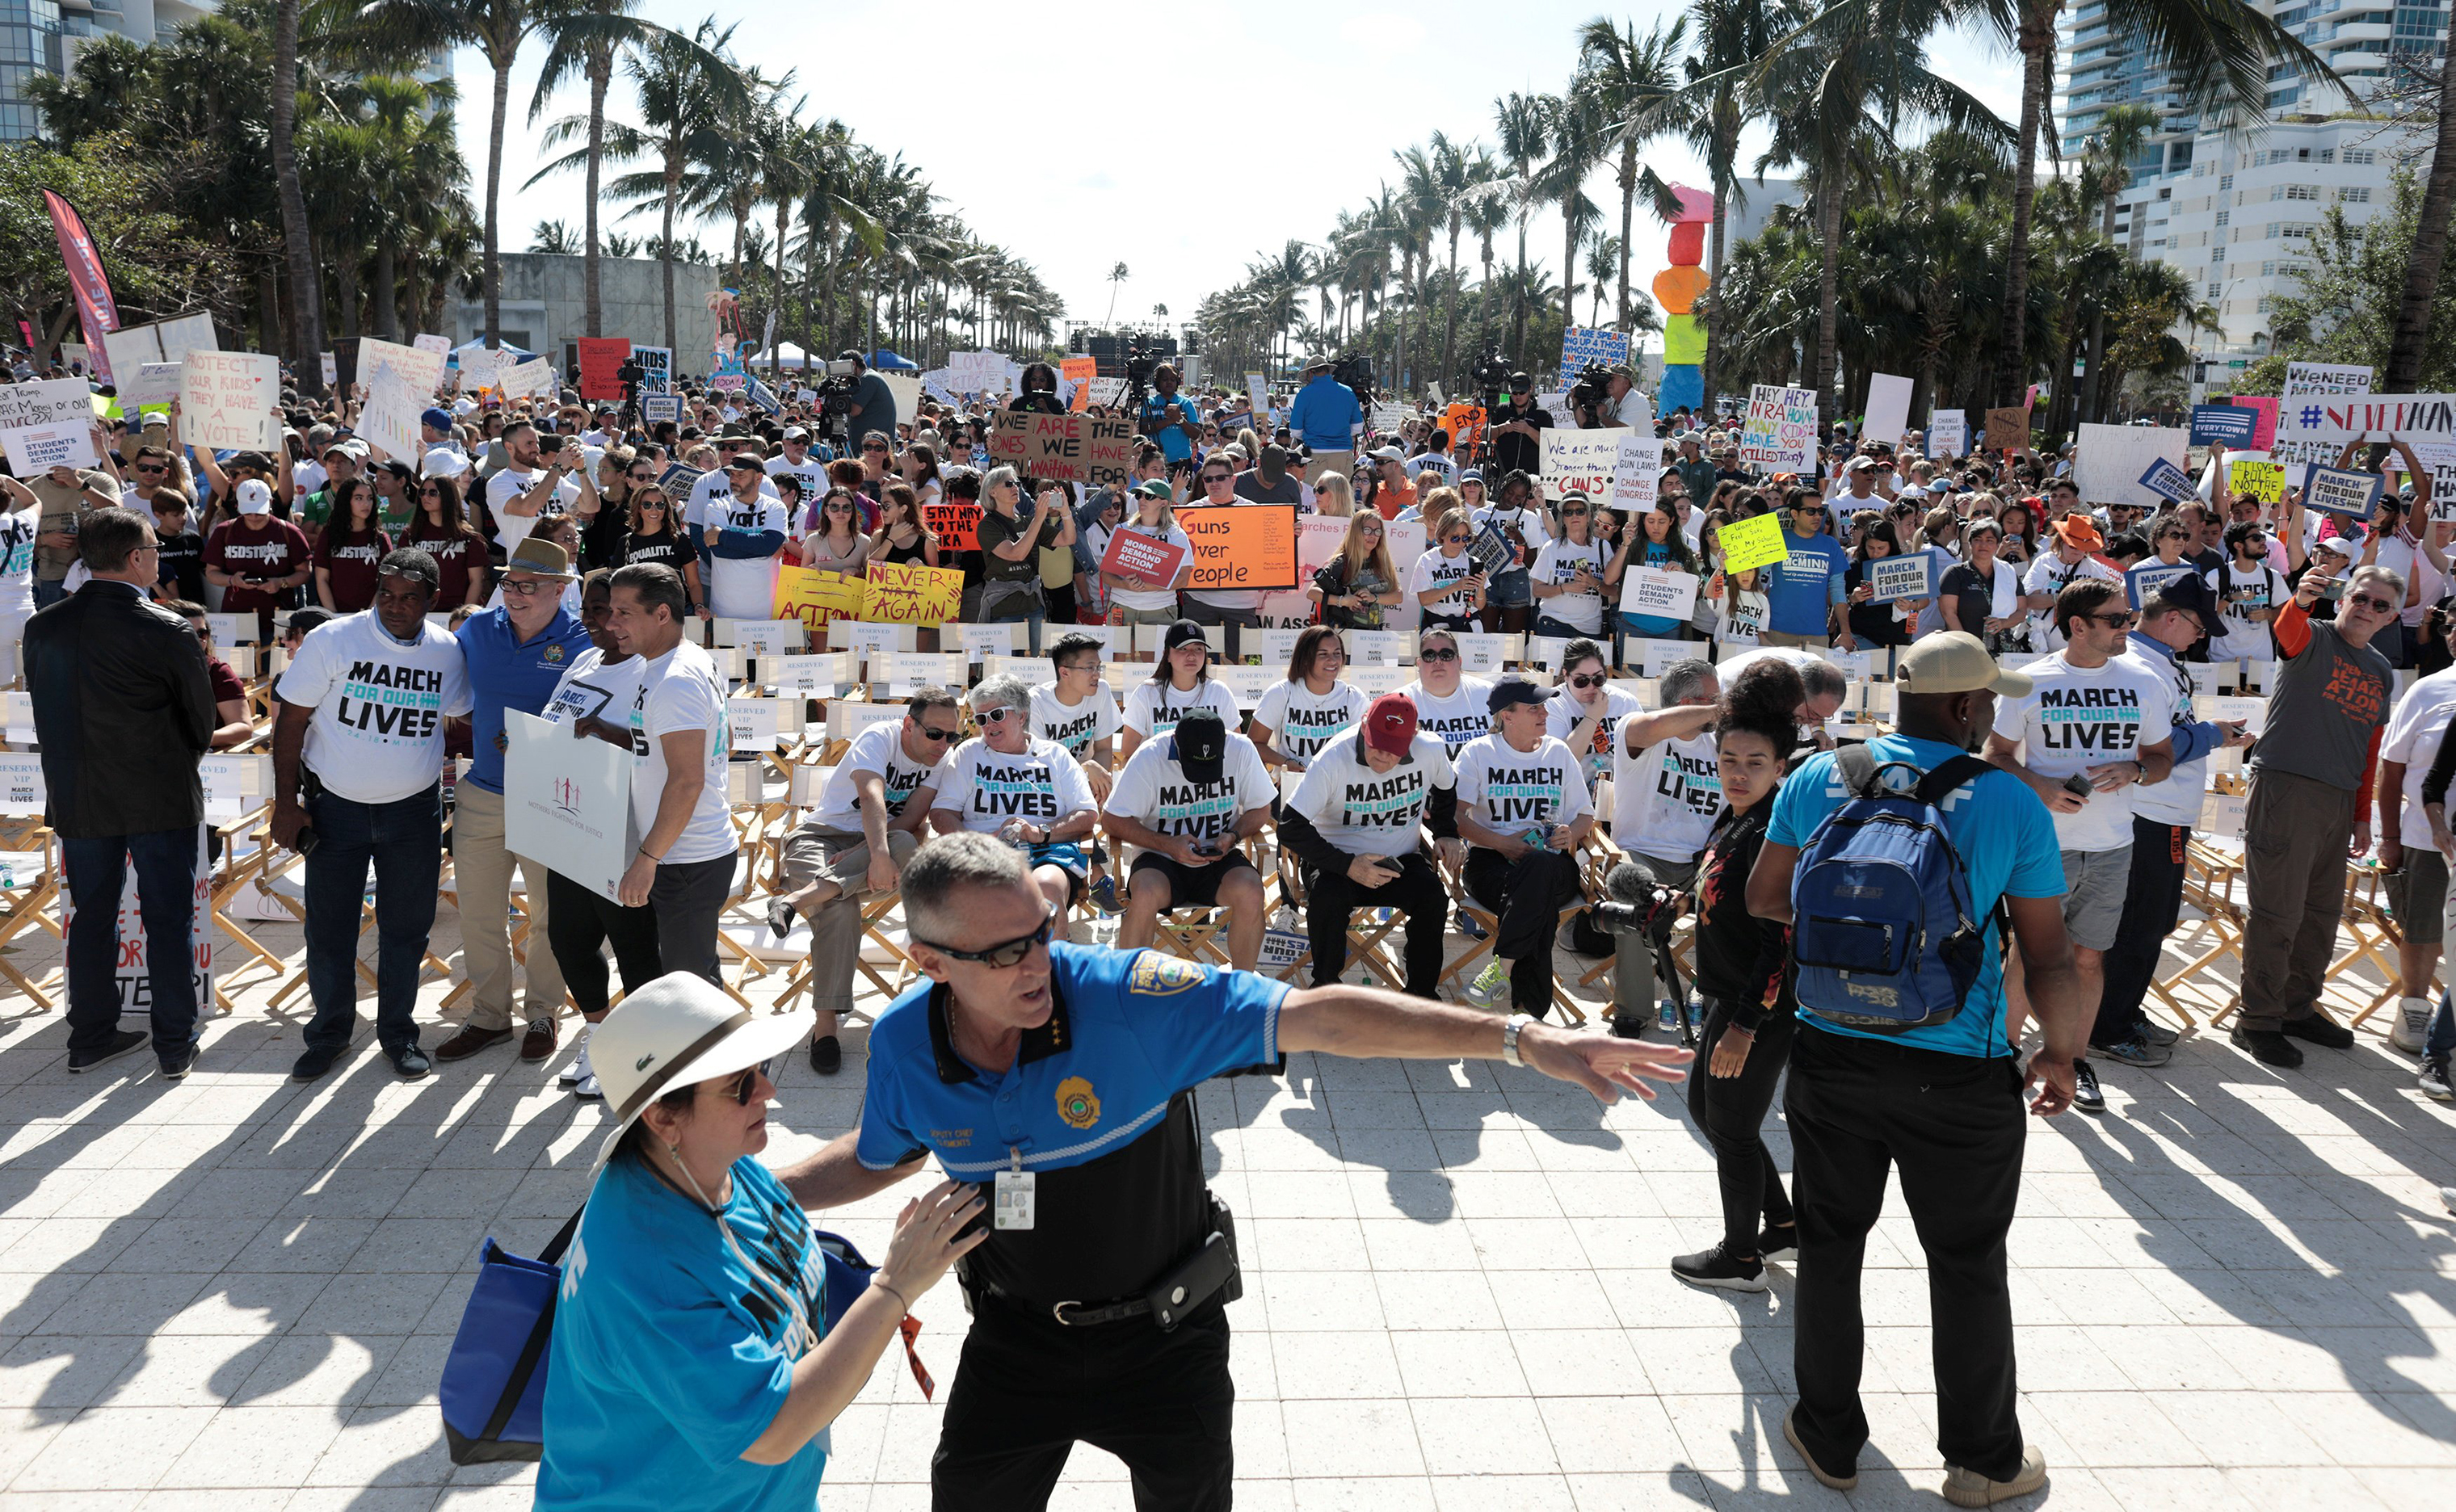 People stand while rallying in the street during the March For Our Lives demonstration, demanding stricter gun control laws, at the Miami Beach Senior High School. (Javier Galeano—Reuters)